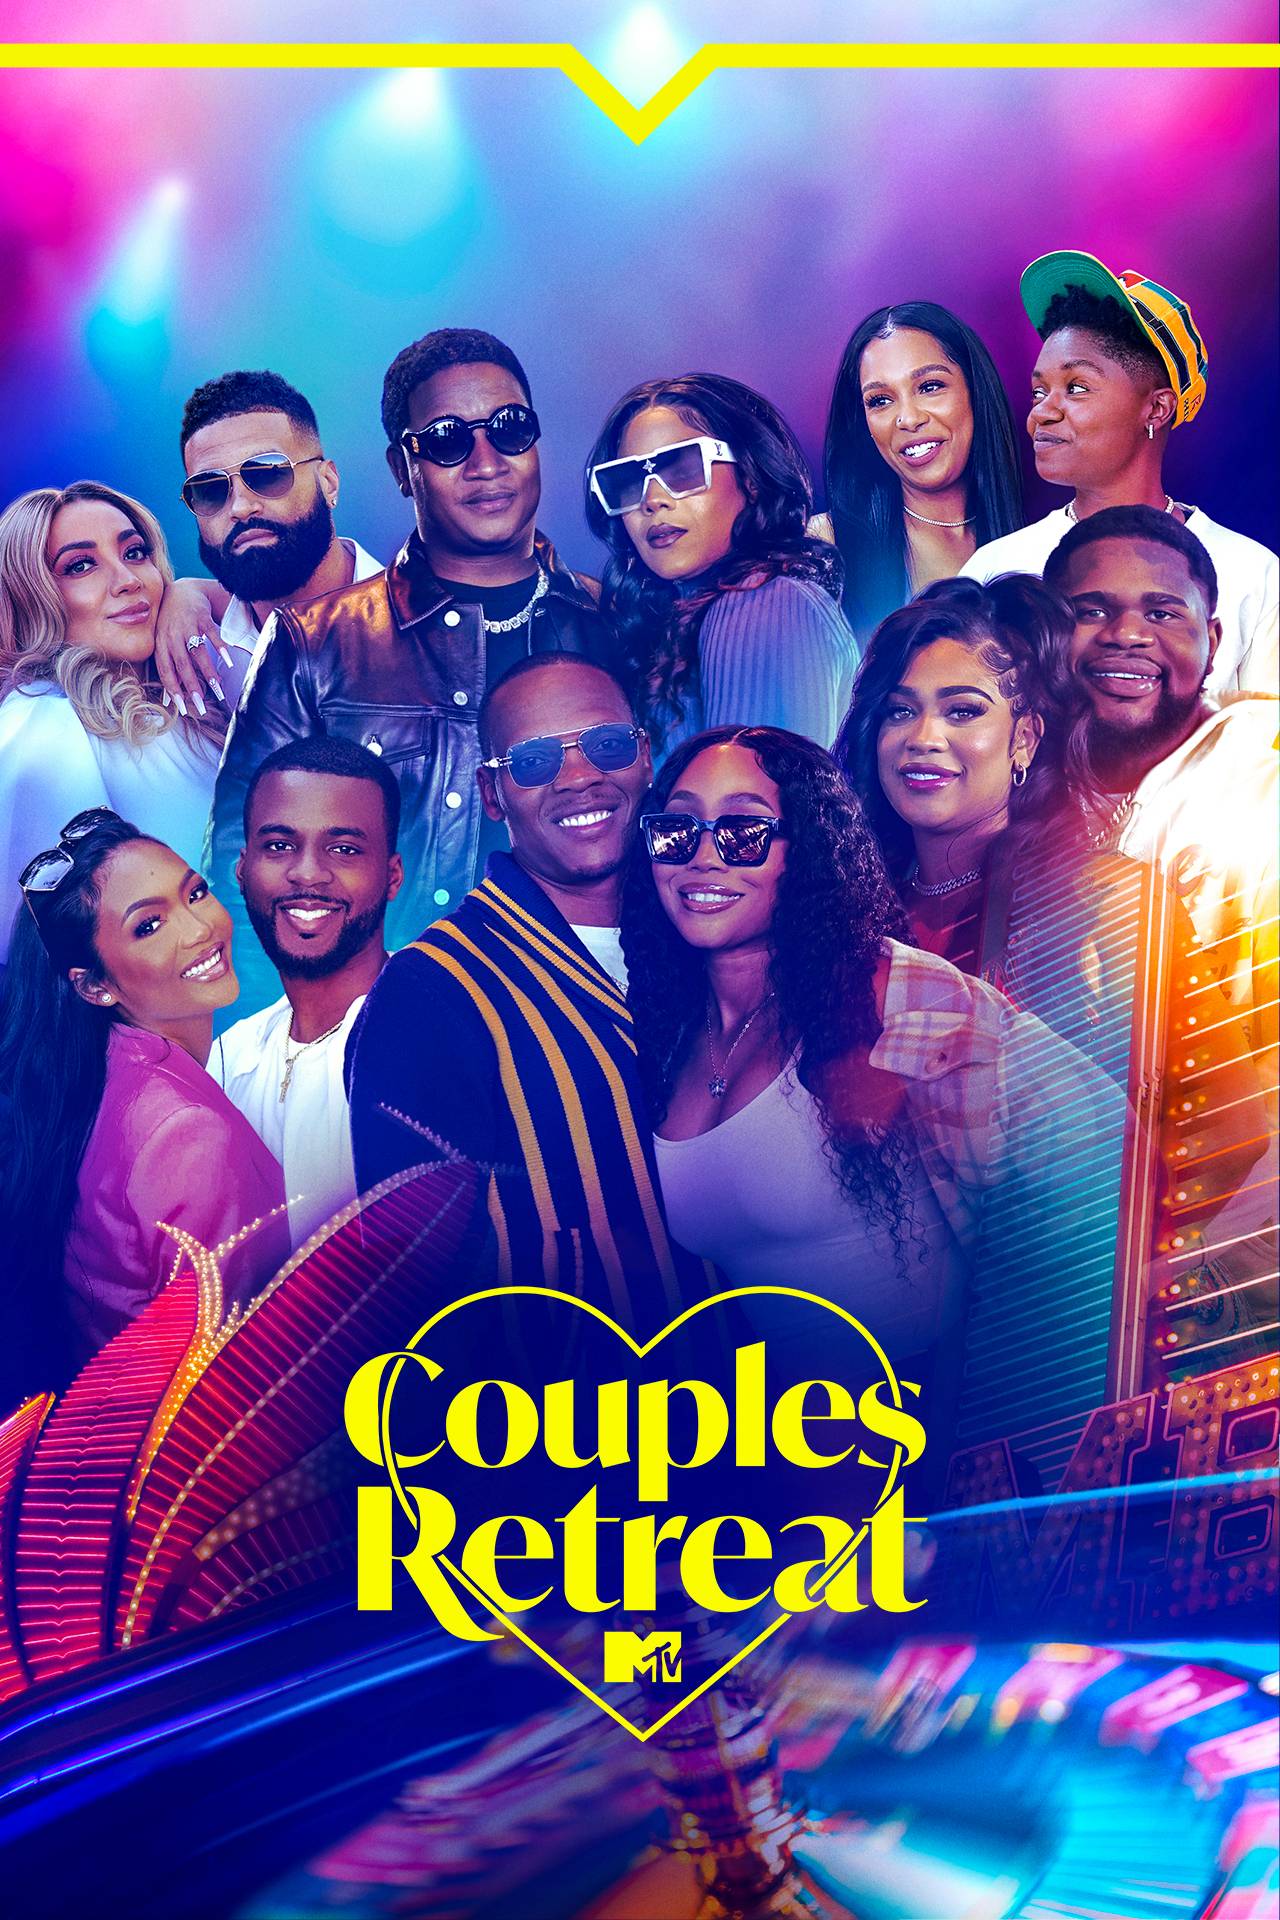 Couples Retreat (4/10) Movie CLIP - Couples Skill-Building (2009